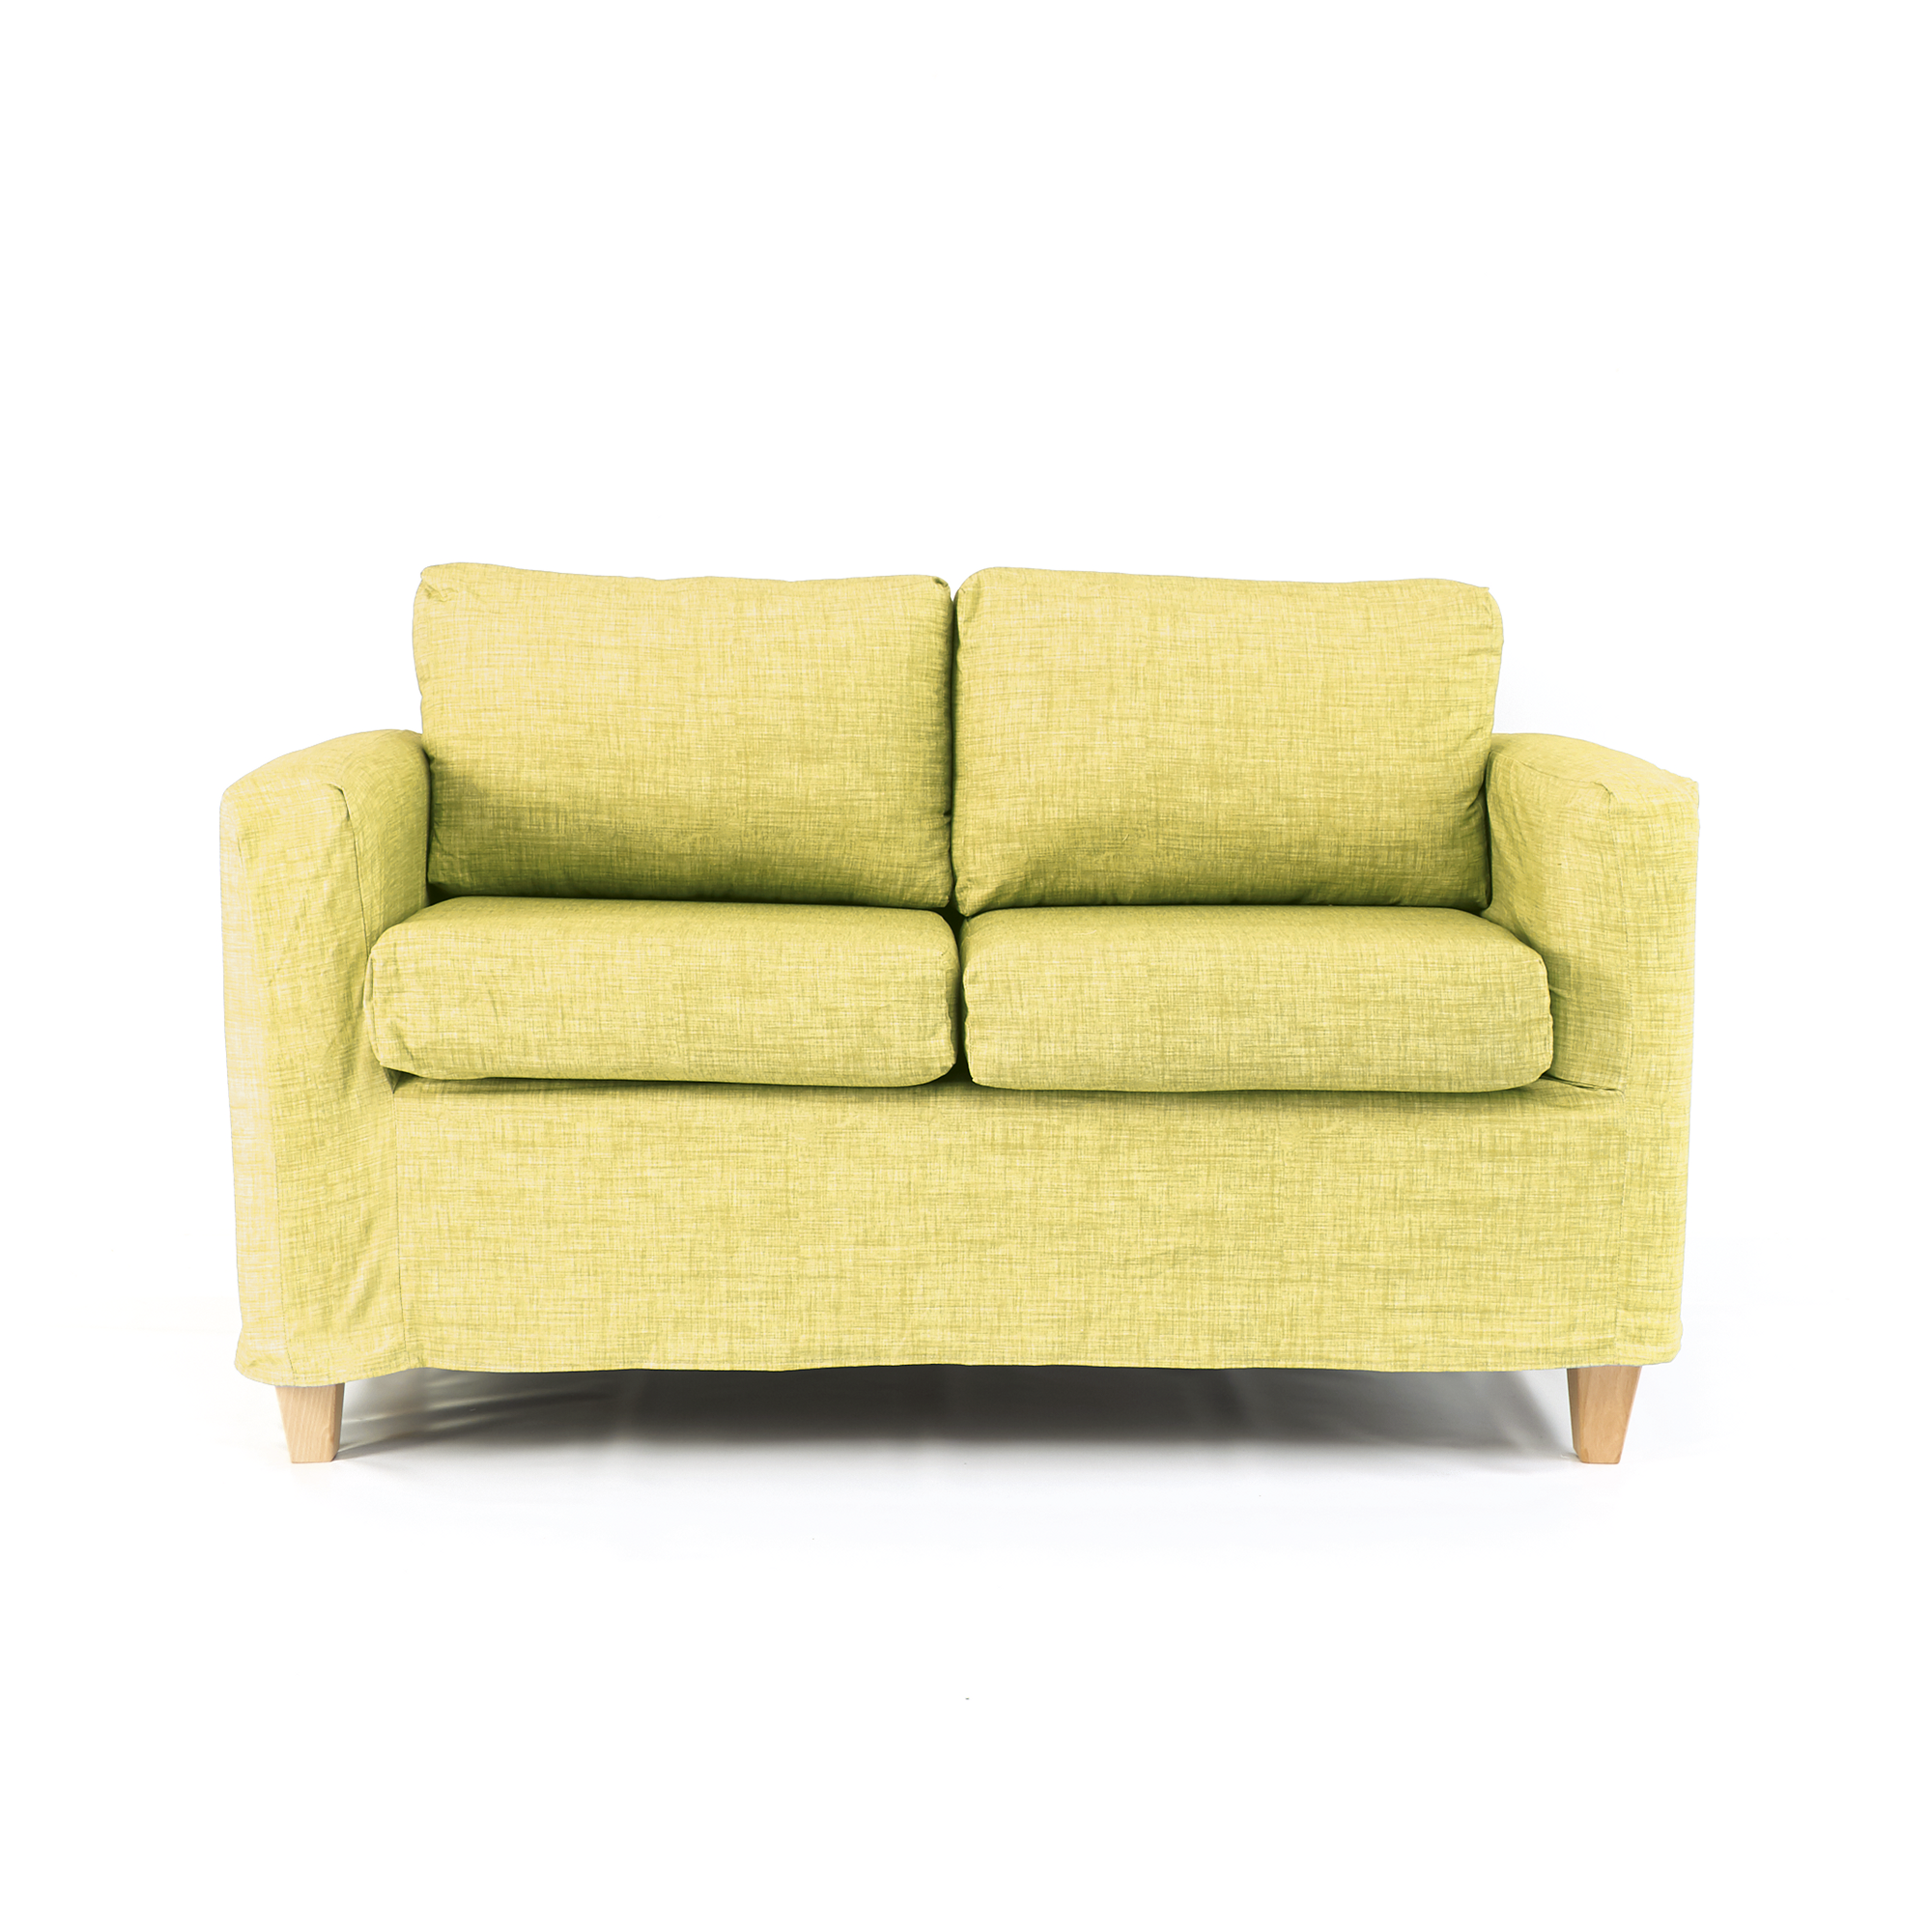 Sofa With Removable Cover Soft Green